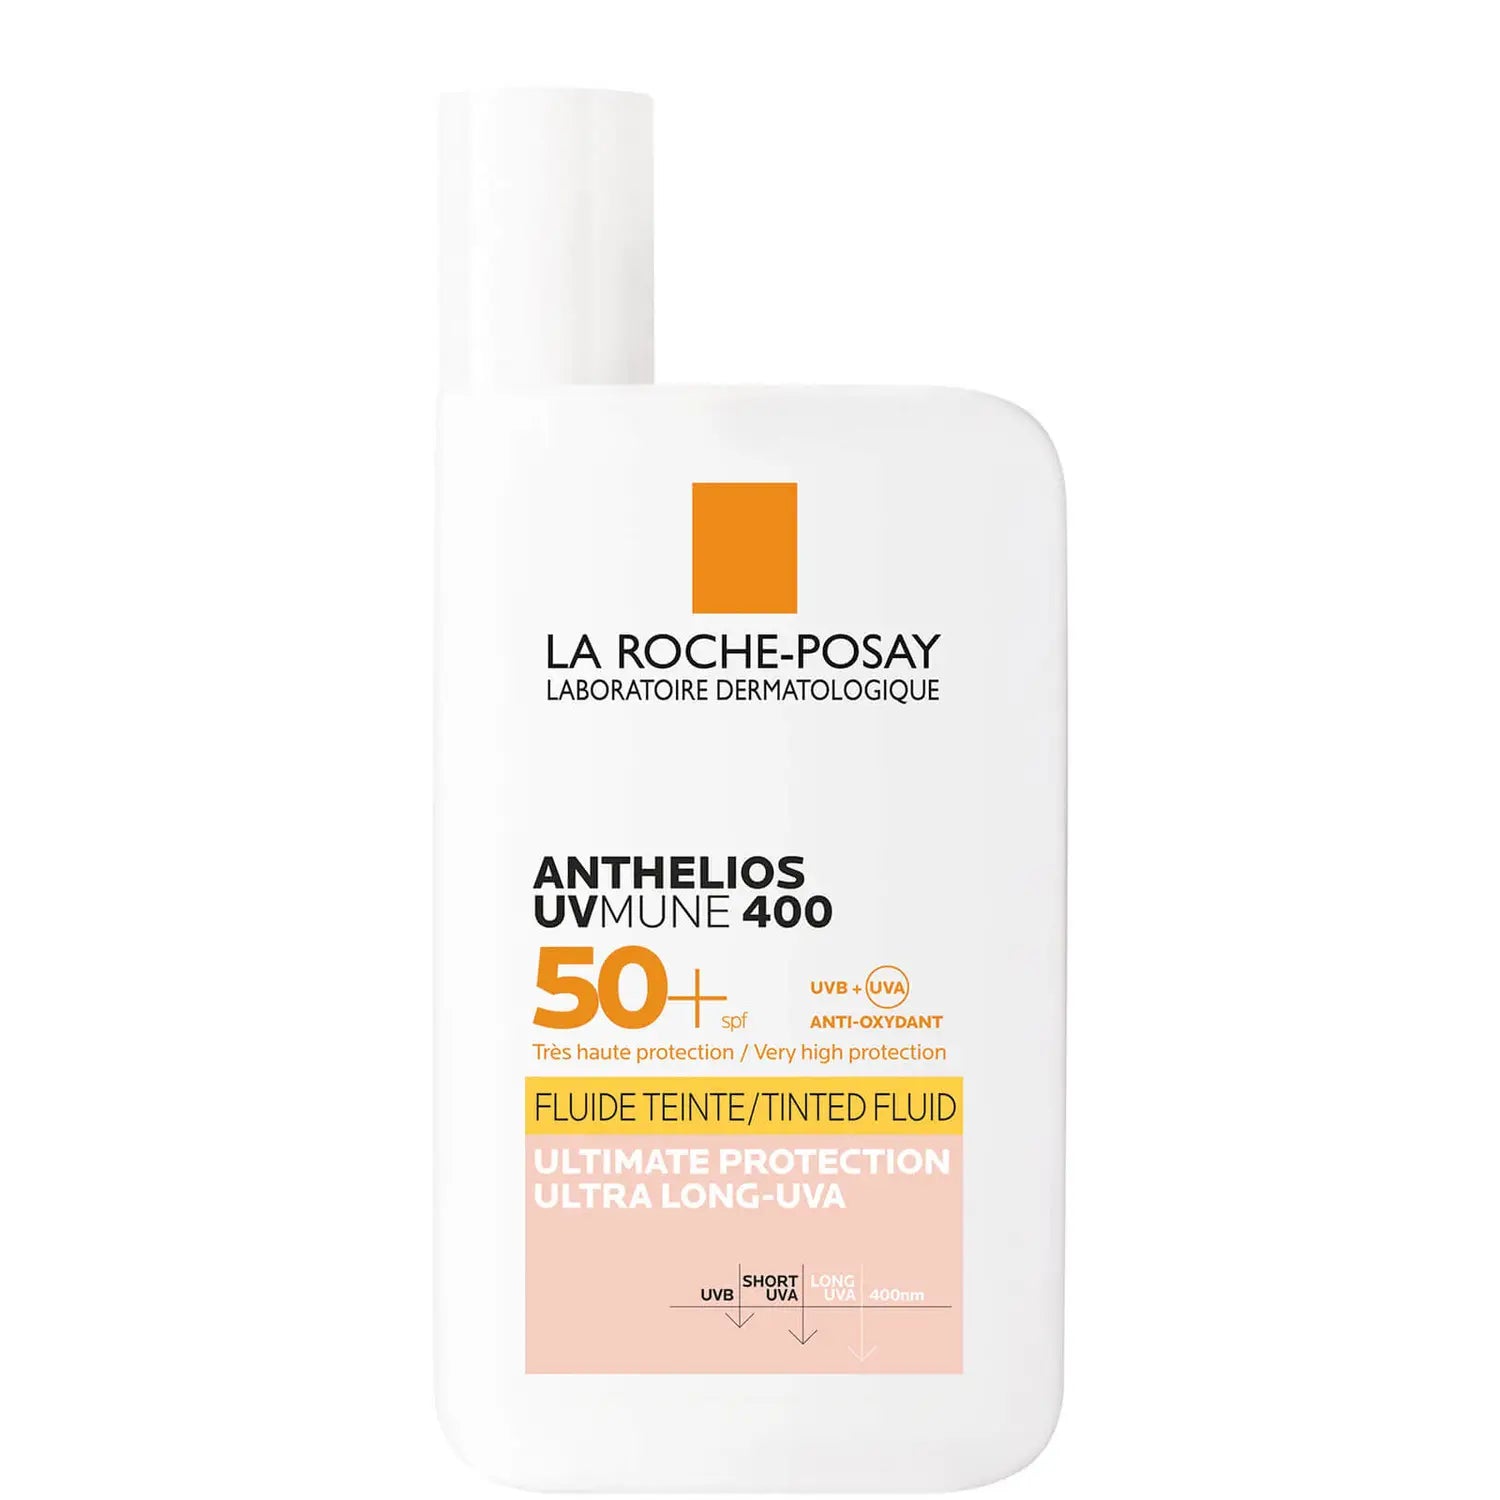 Anthelios UVmune Fluid Sunscreen for Face 50 mL Tinted